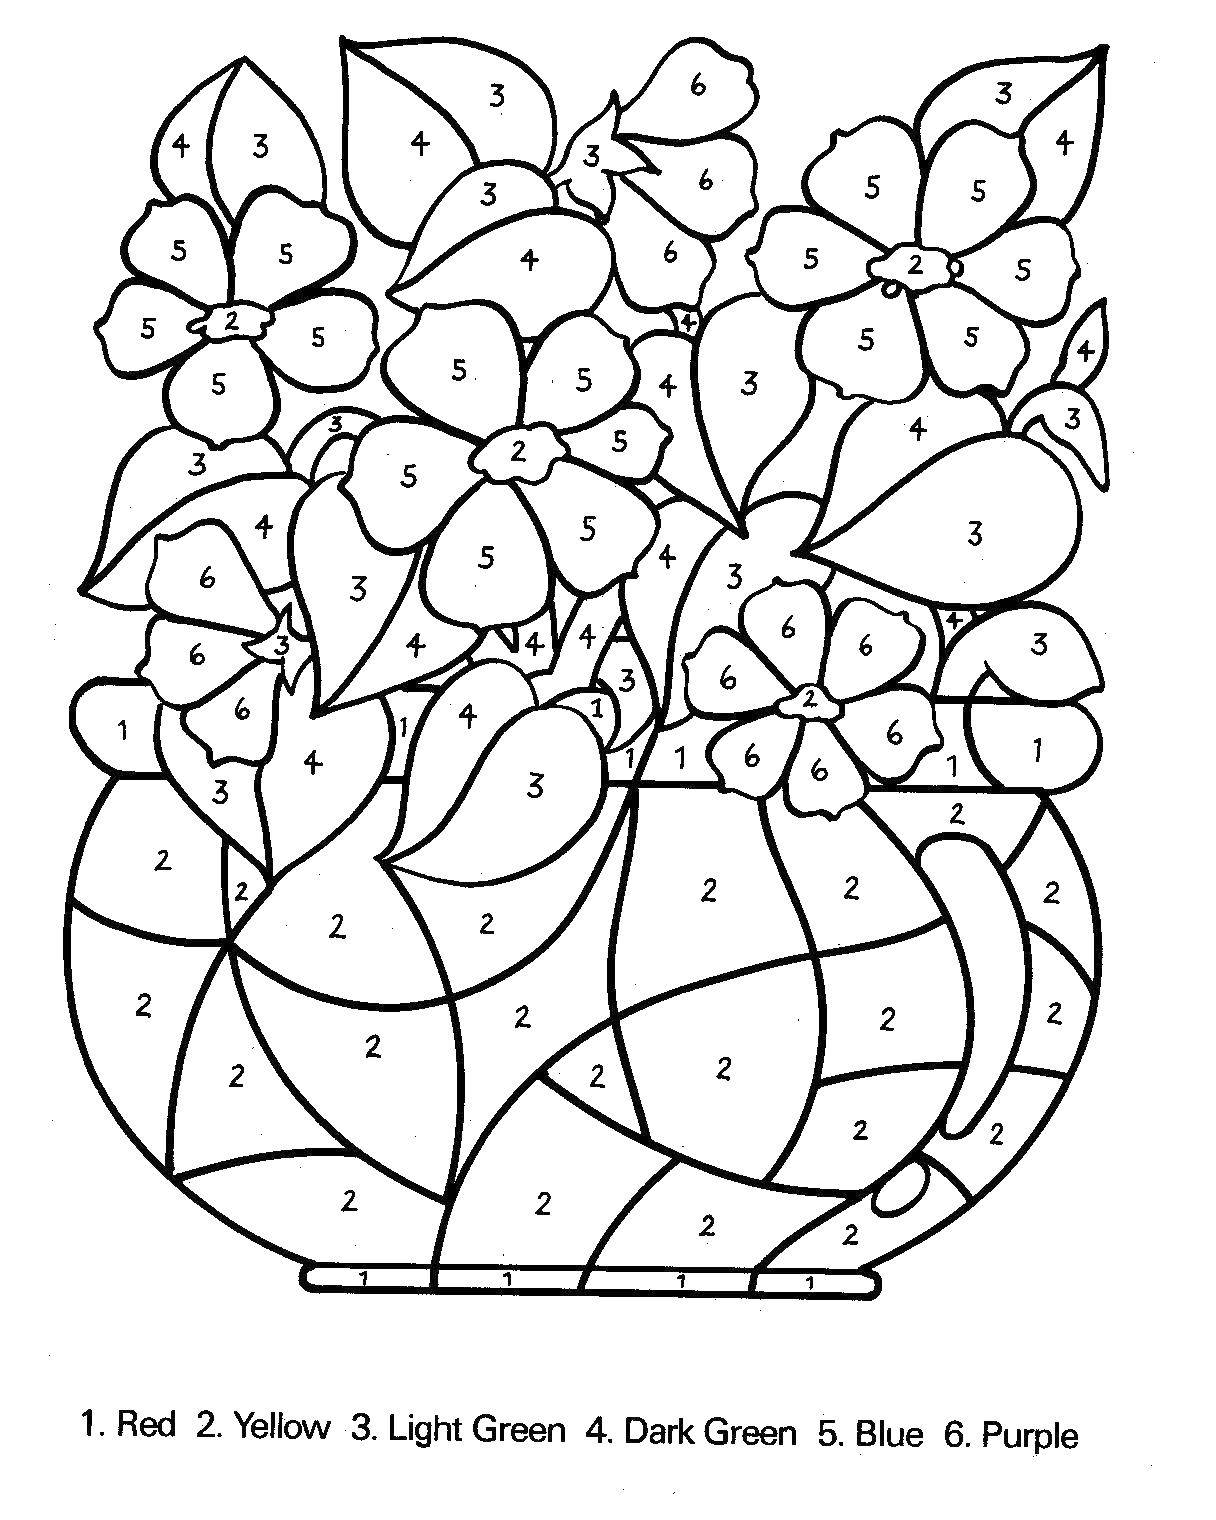 Coloring Paint vase with flowers by numbers. Category coloring by numbers. Tags:  numbers, flowers, vase.